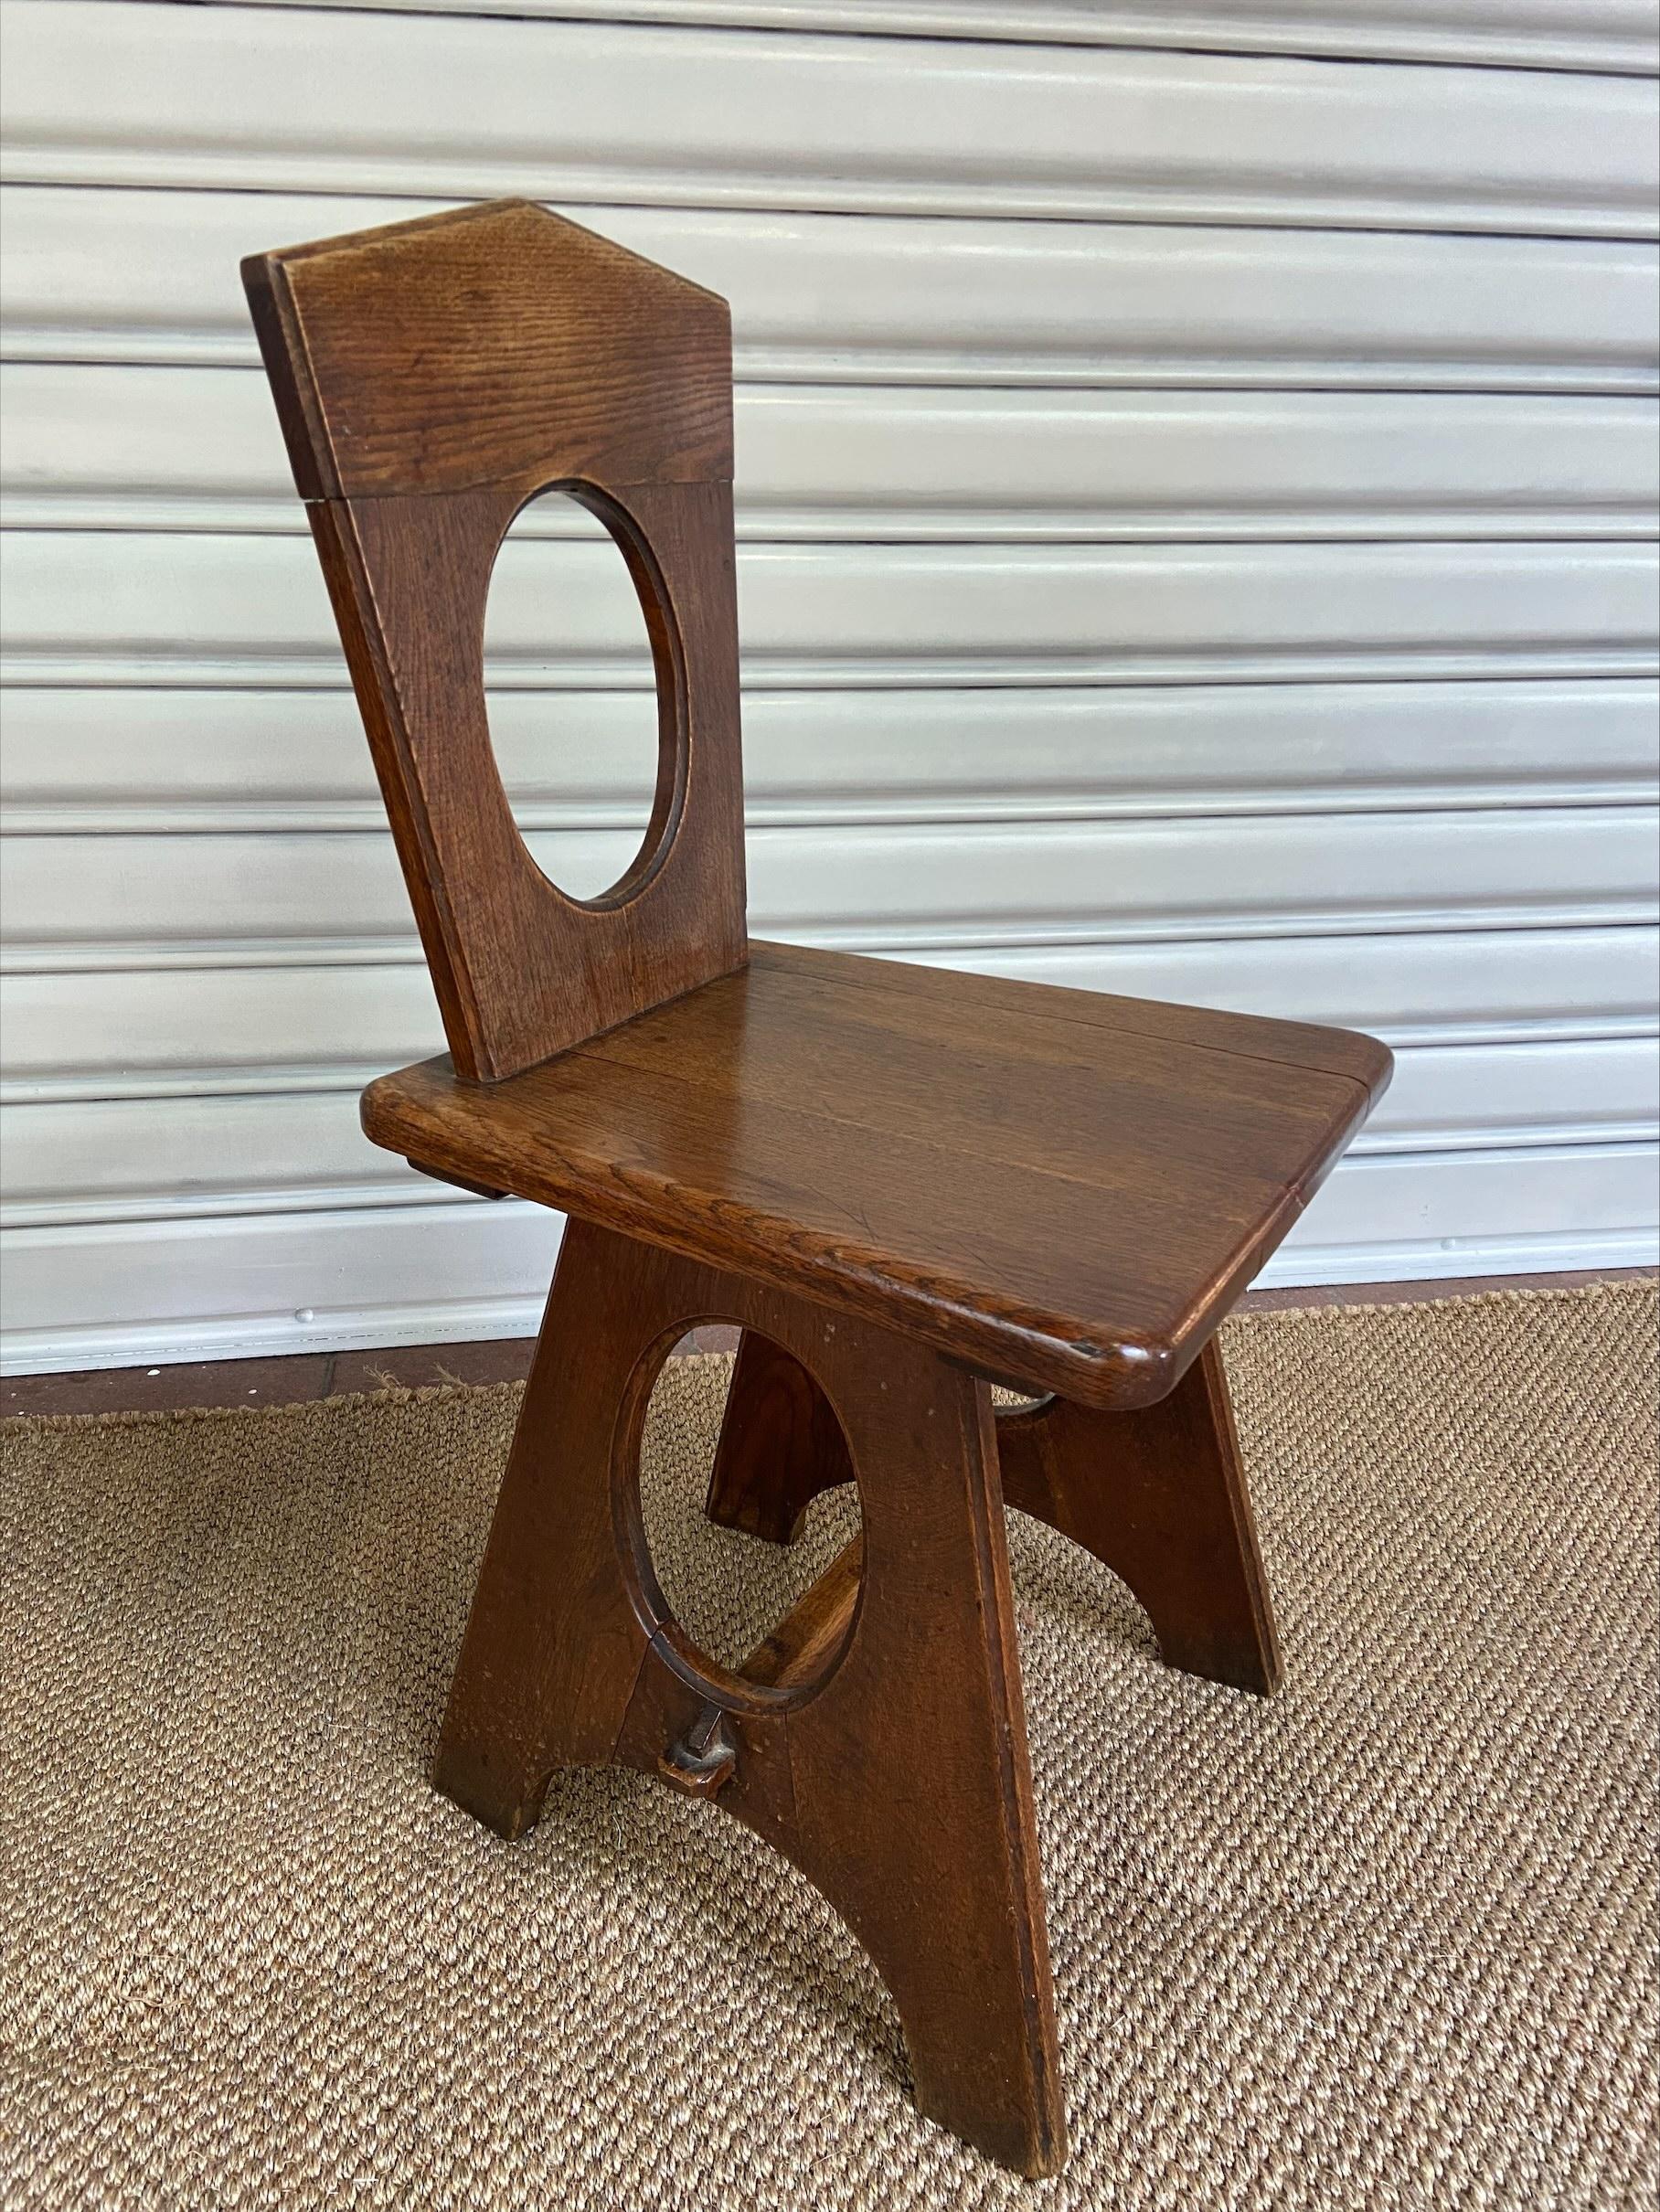 Series of 4 chairs called 